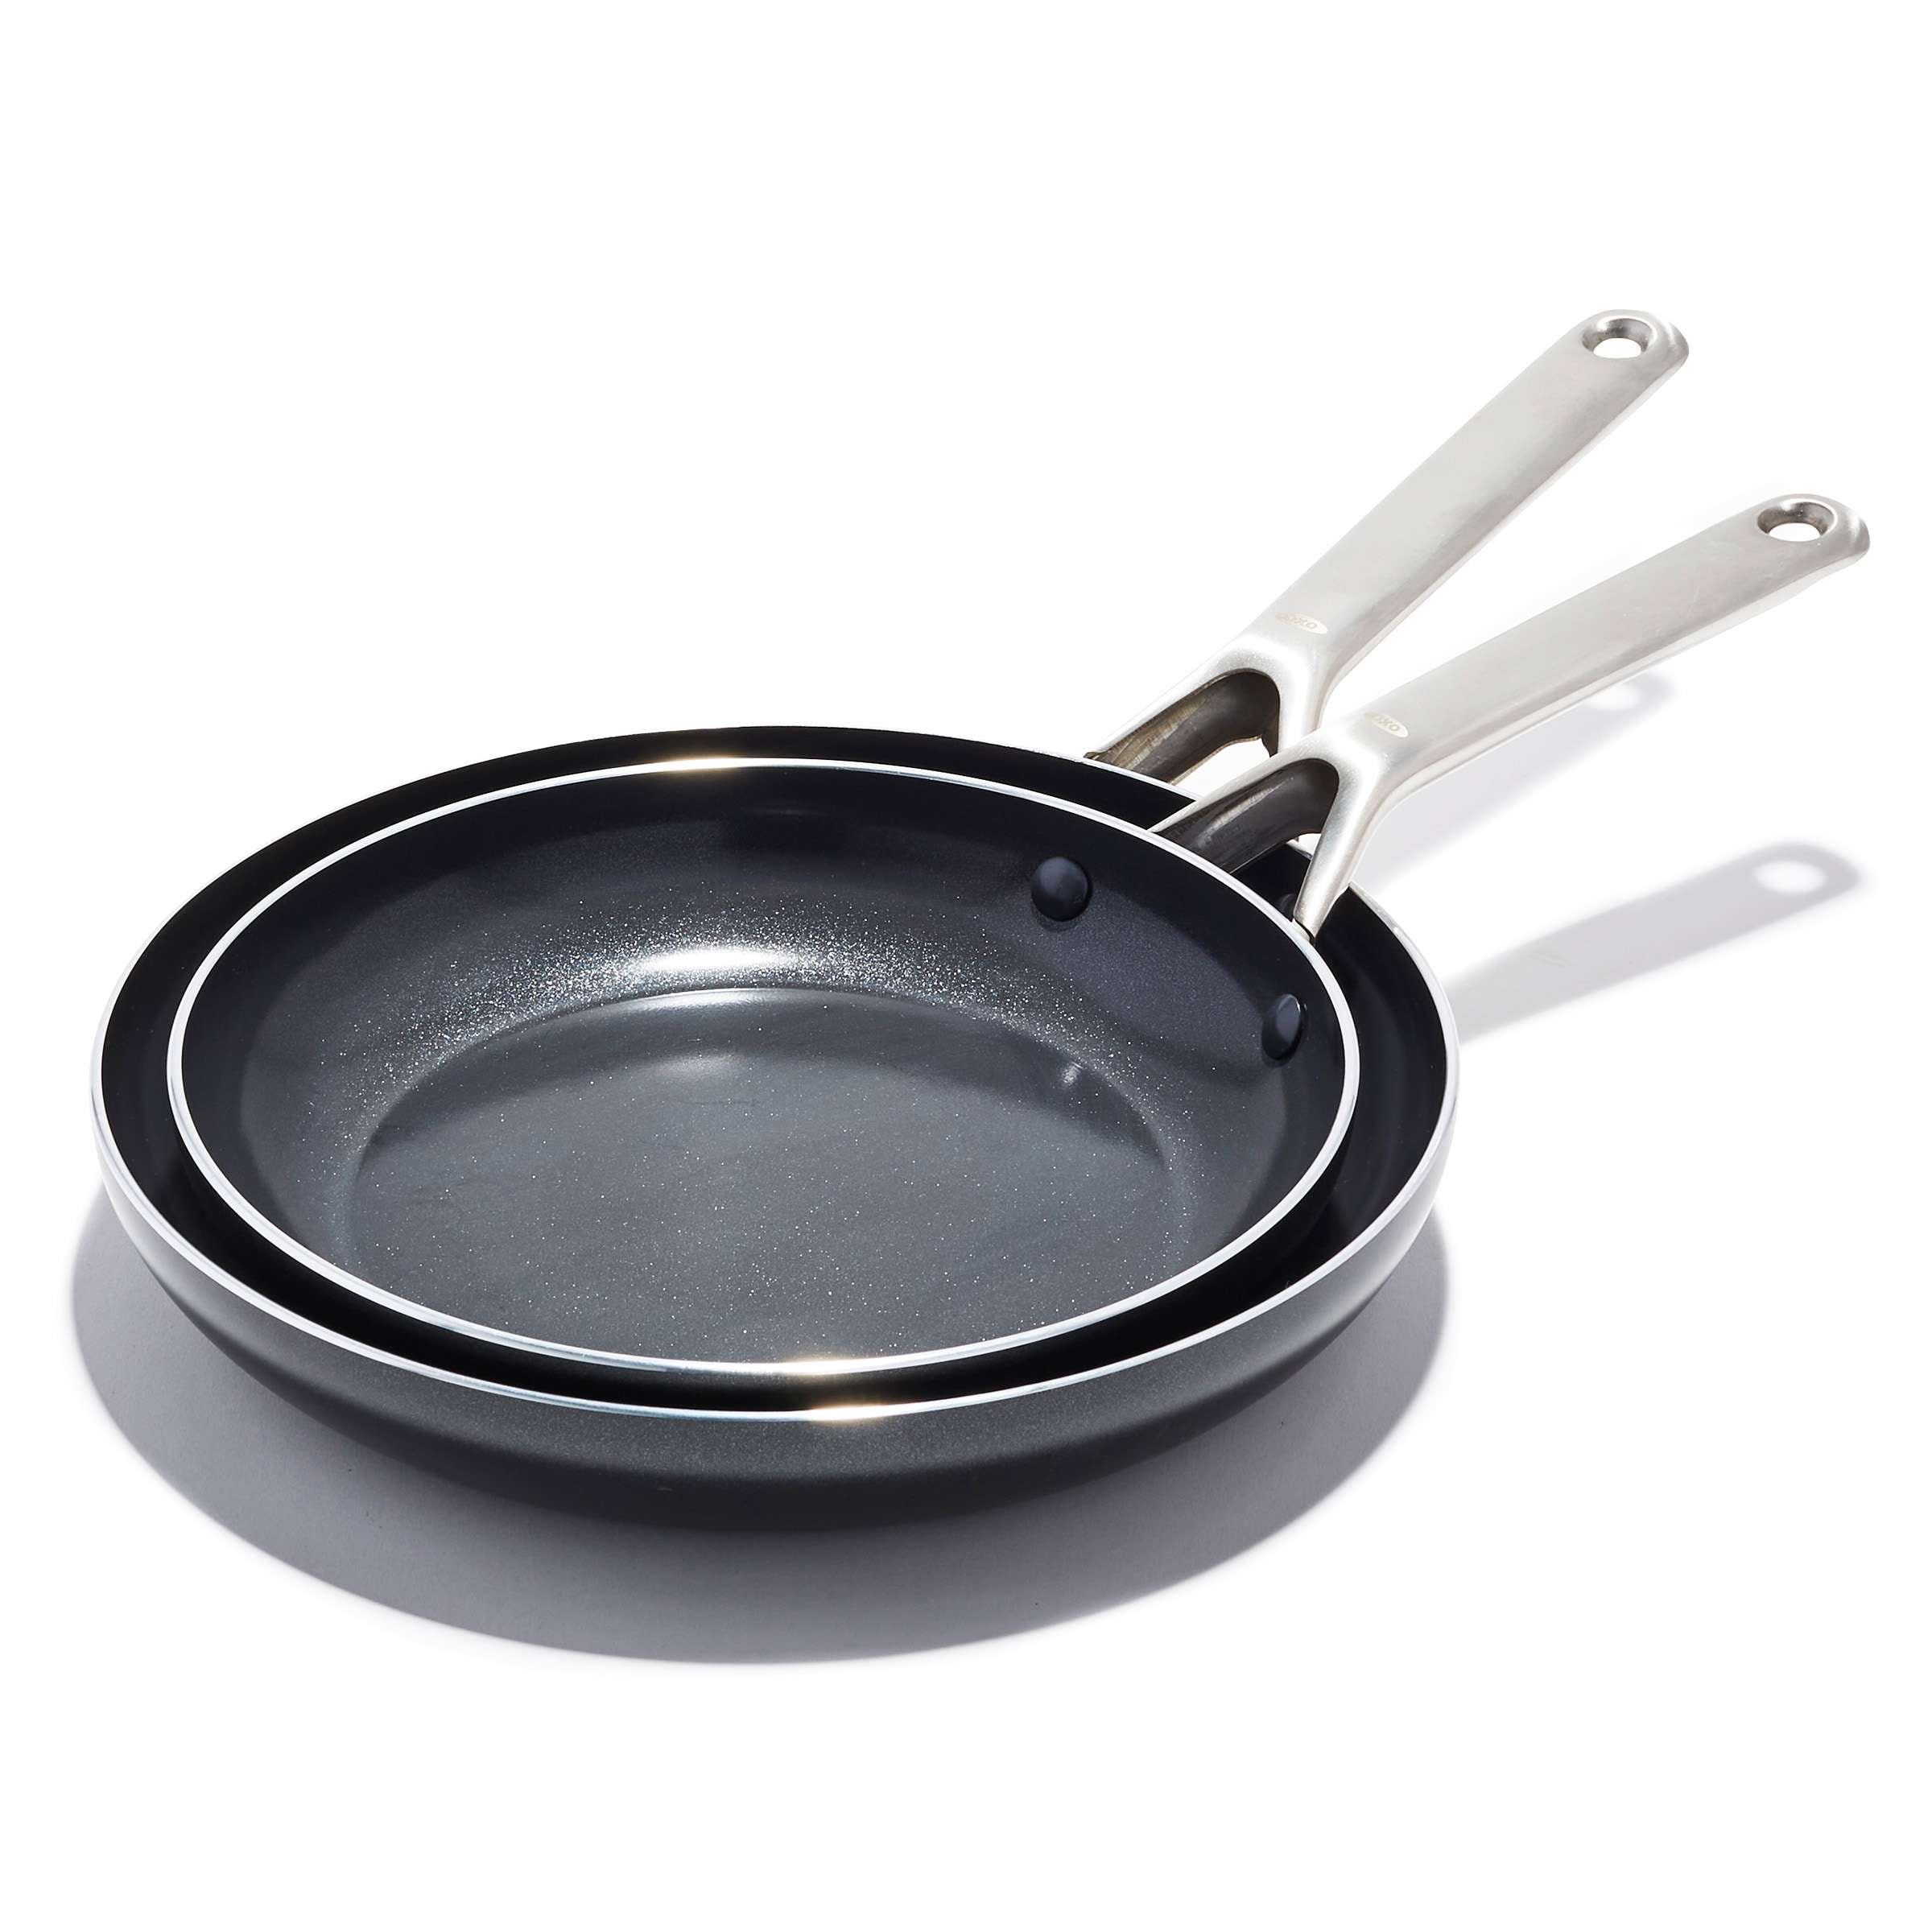 OXO Ceramic Professional Non-Stick Frypan Review (Tested)